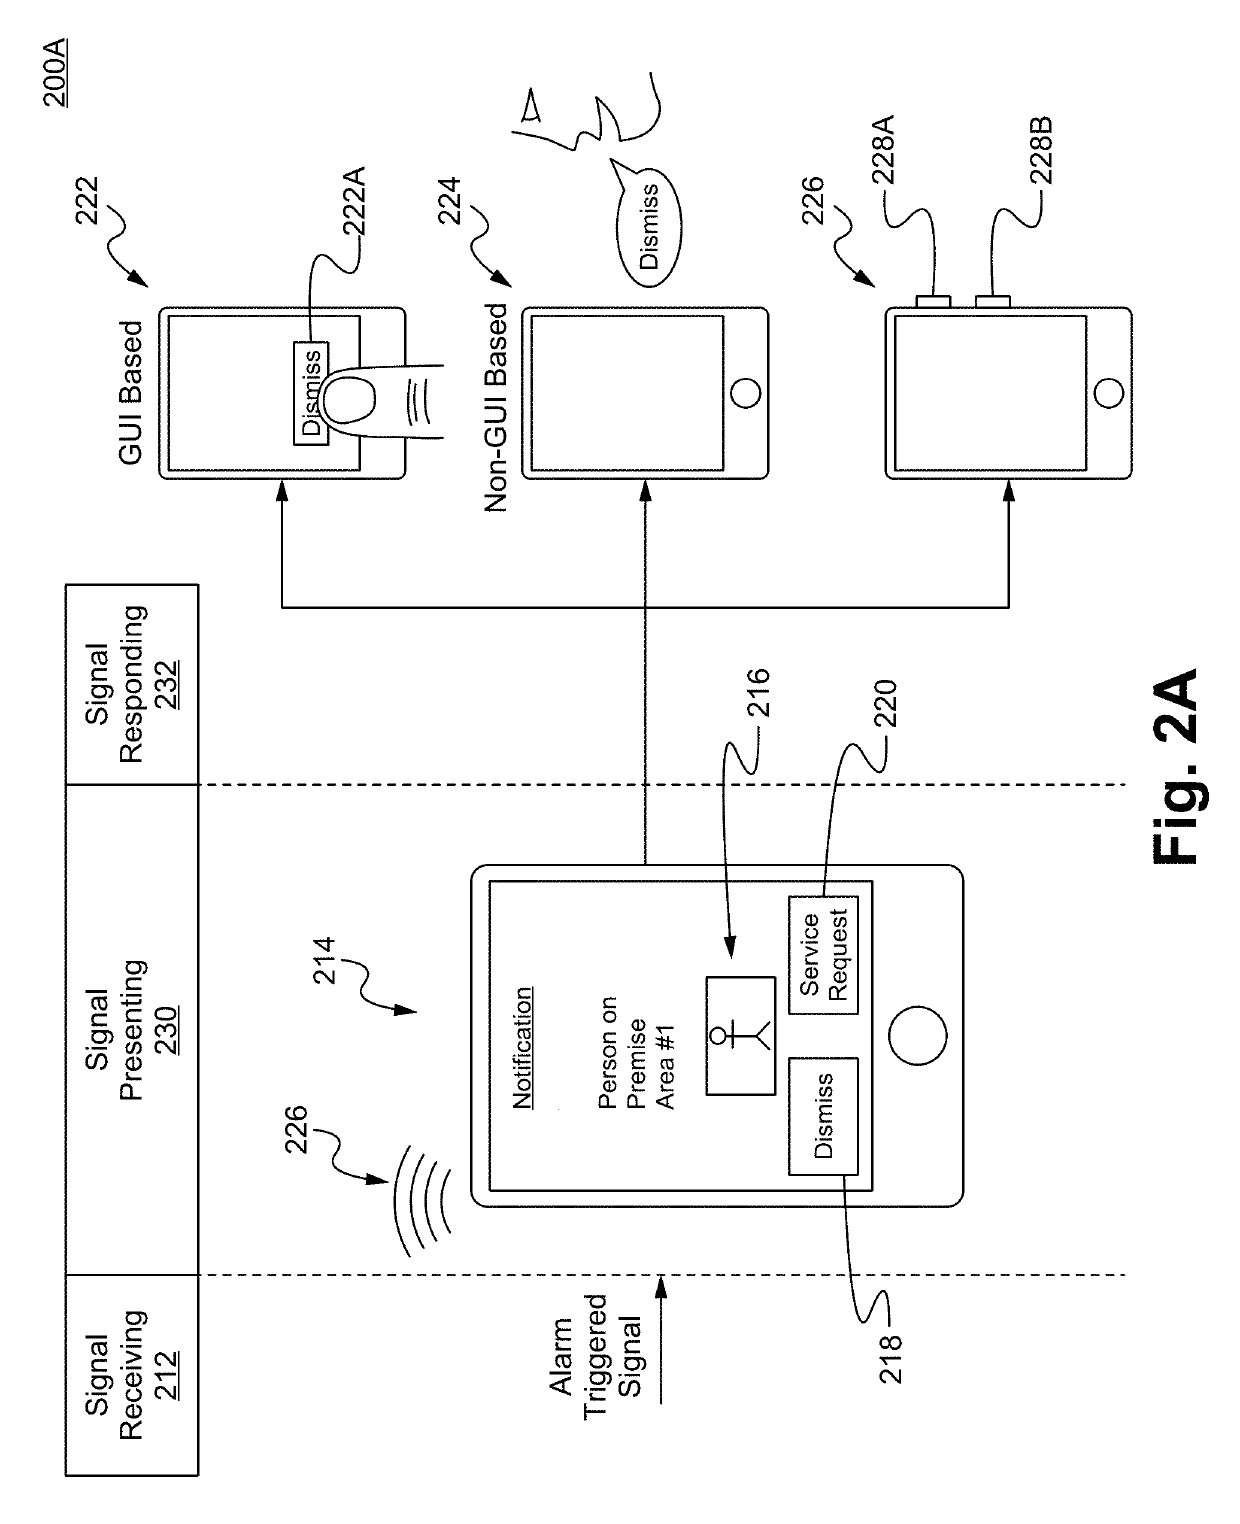 Methods of and devices for filtering triggered alarm signals